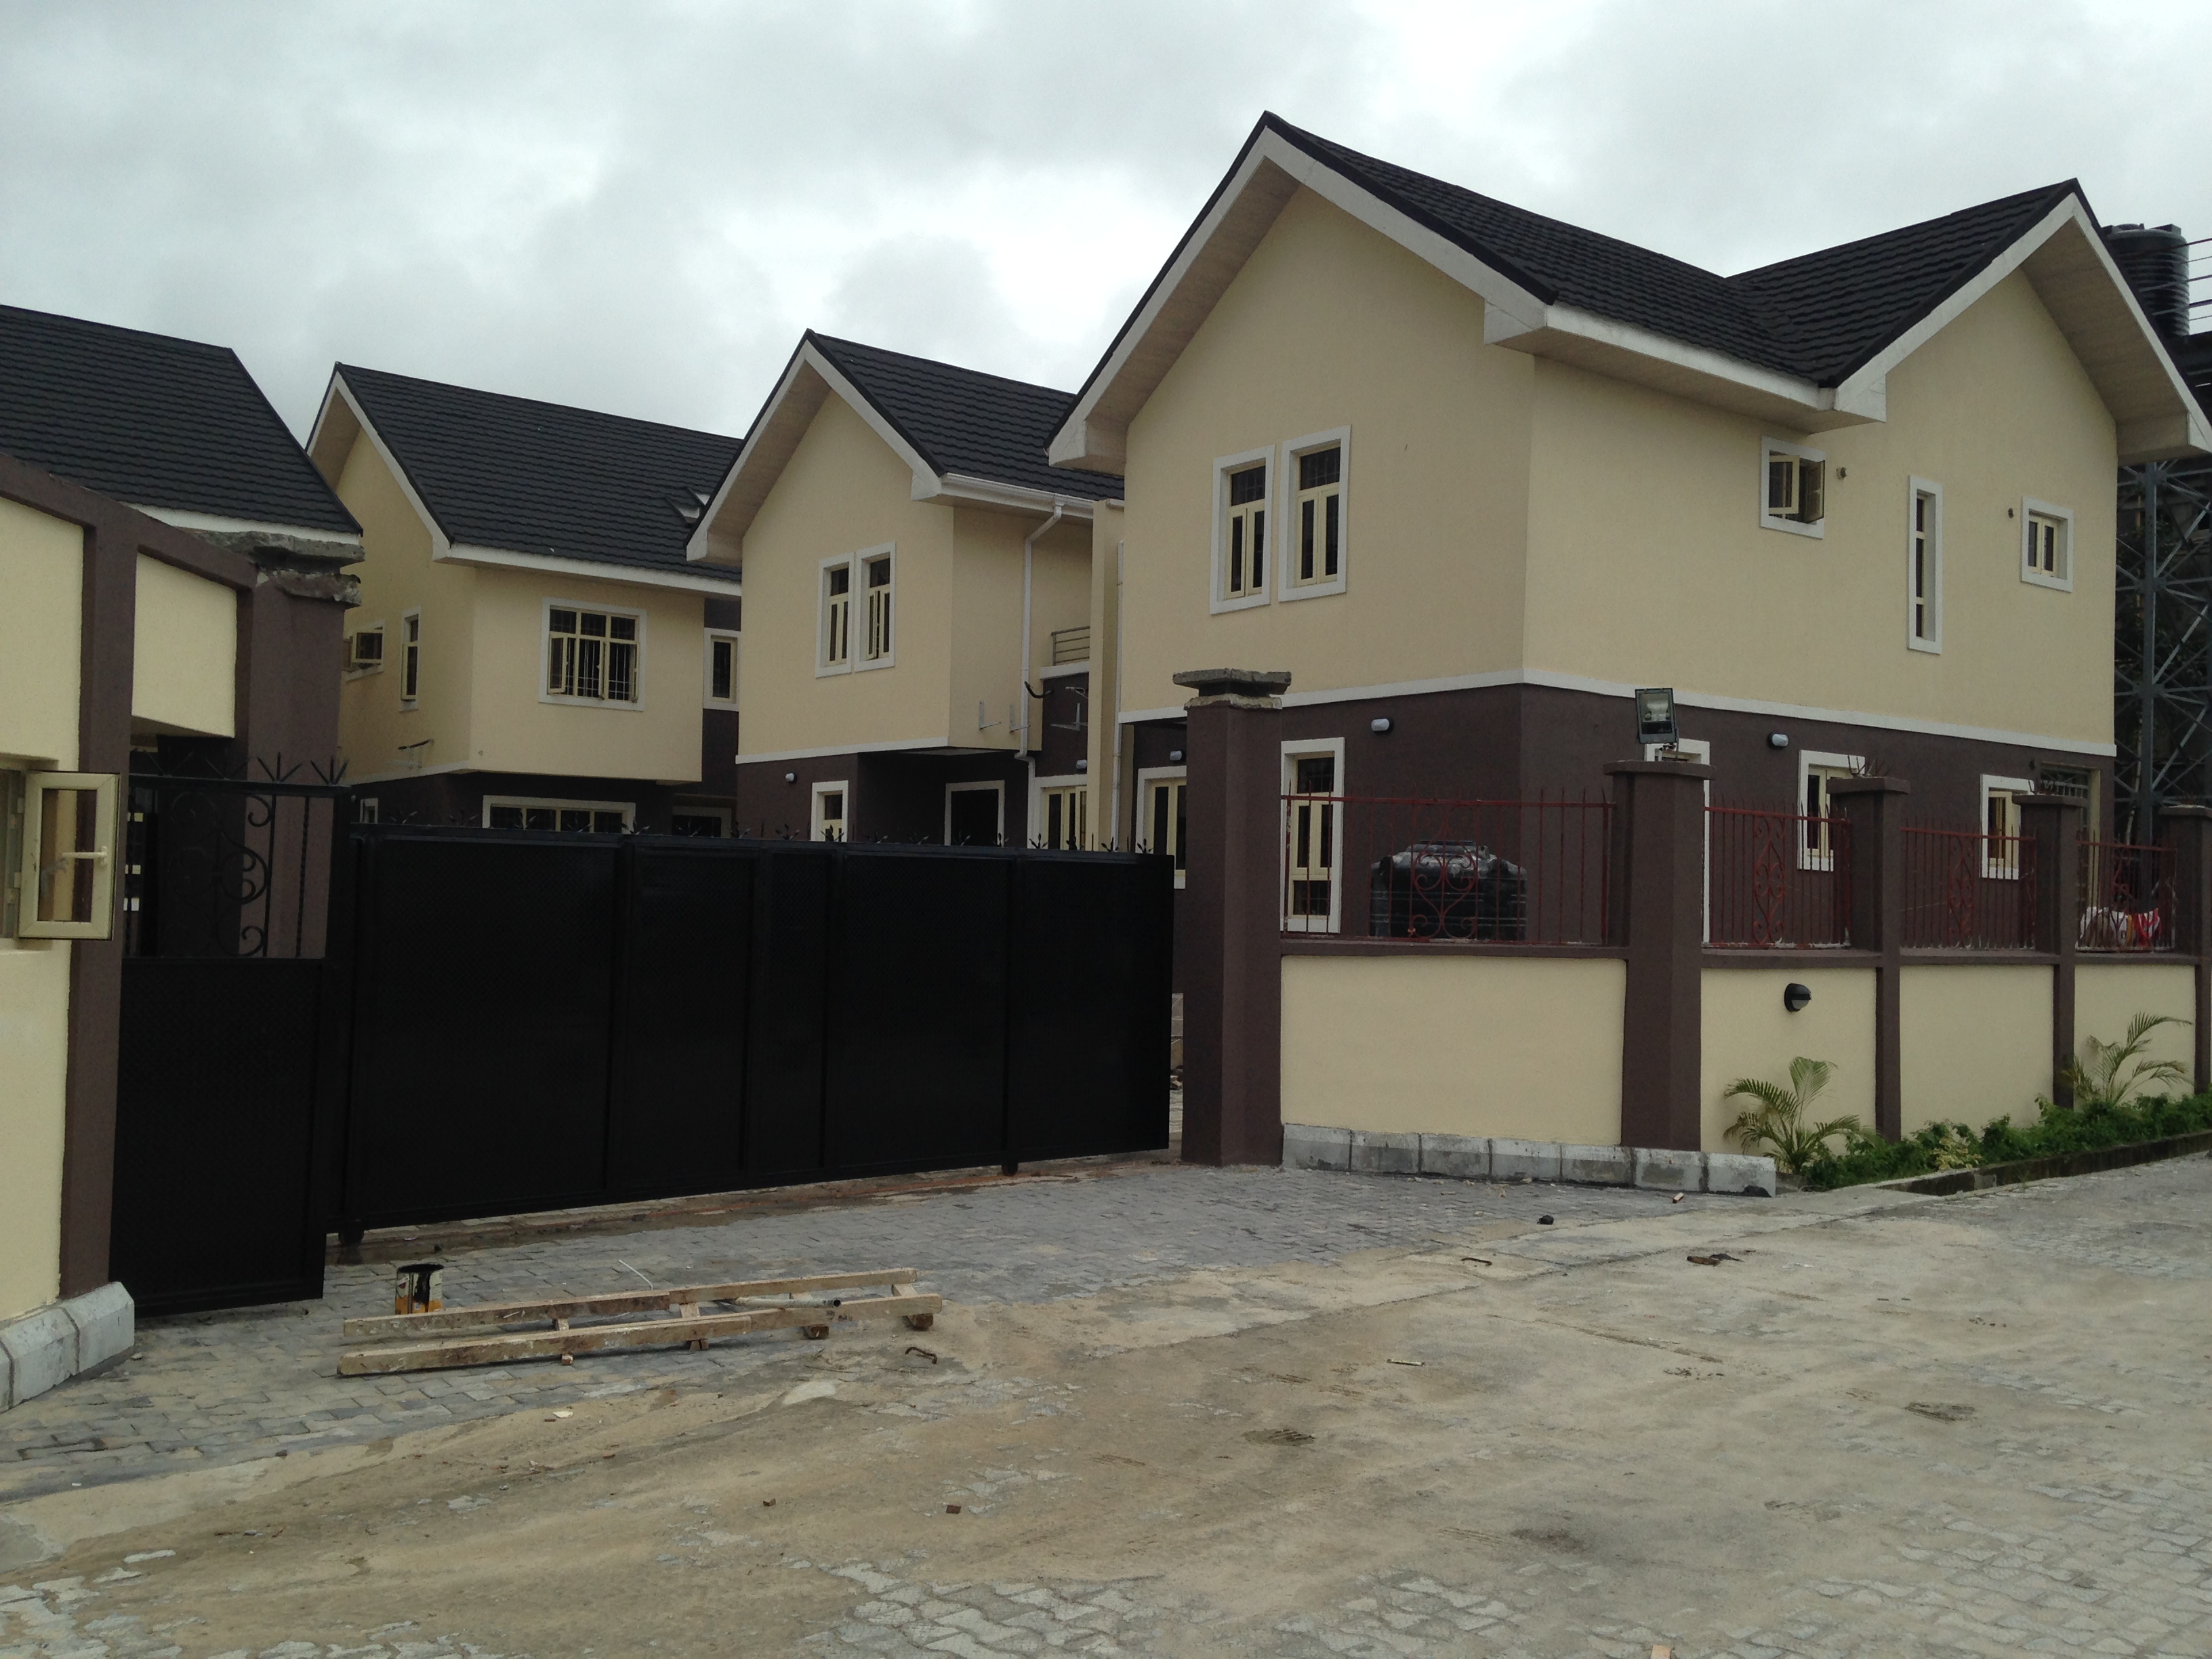  8-Unit of 2-bedrooms duplexes 
and 4-unit of 3-bedrooms 
duplexes for Mr. Tony Ikpea at 
Lekki-Epe Expressway, Lagos